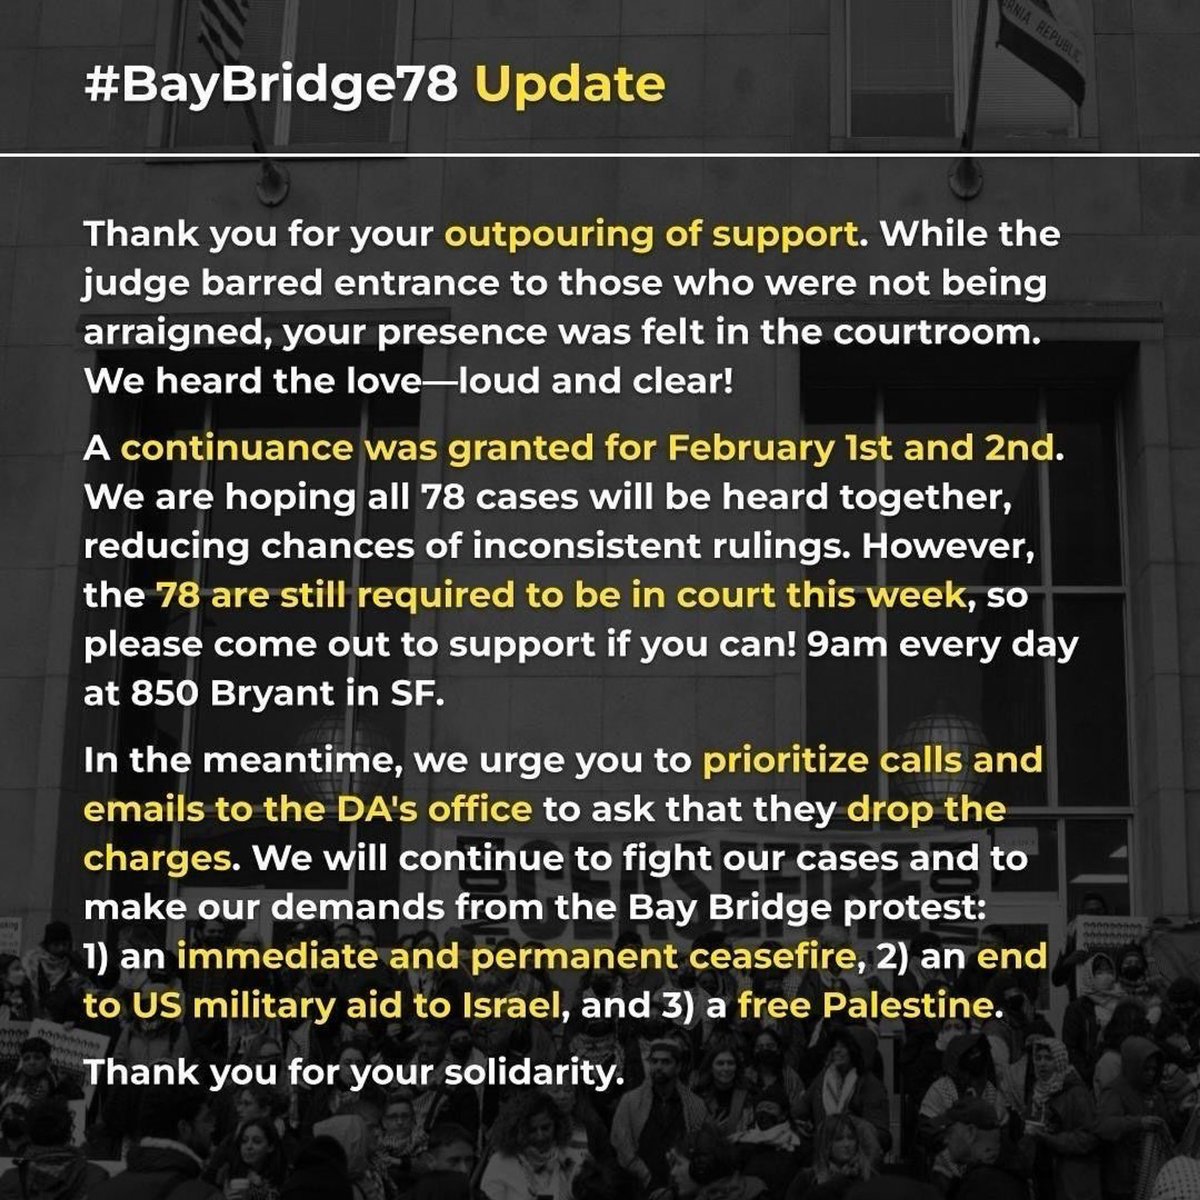 🚨BAY BRIDGE 78 UPDATES🚨

Thank you all for your ongoing solidarity with the #BayBridge78! Your outpouring of support was deeply felt & your presence also helped to put pressure on the DA’s office. While the judge didn’t allow supporters in, the public support was loud & clear!